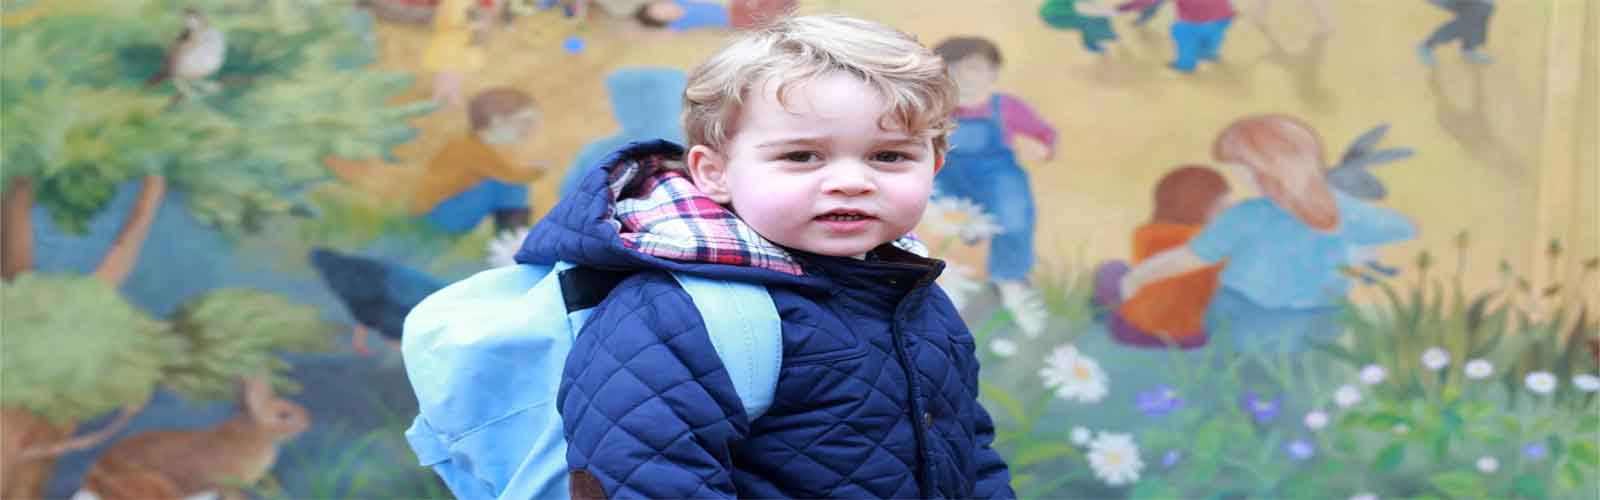 Britain's Prince George ready to start school in September